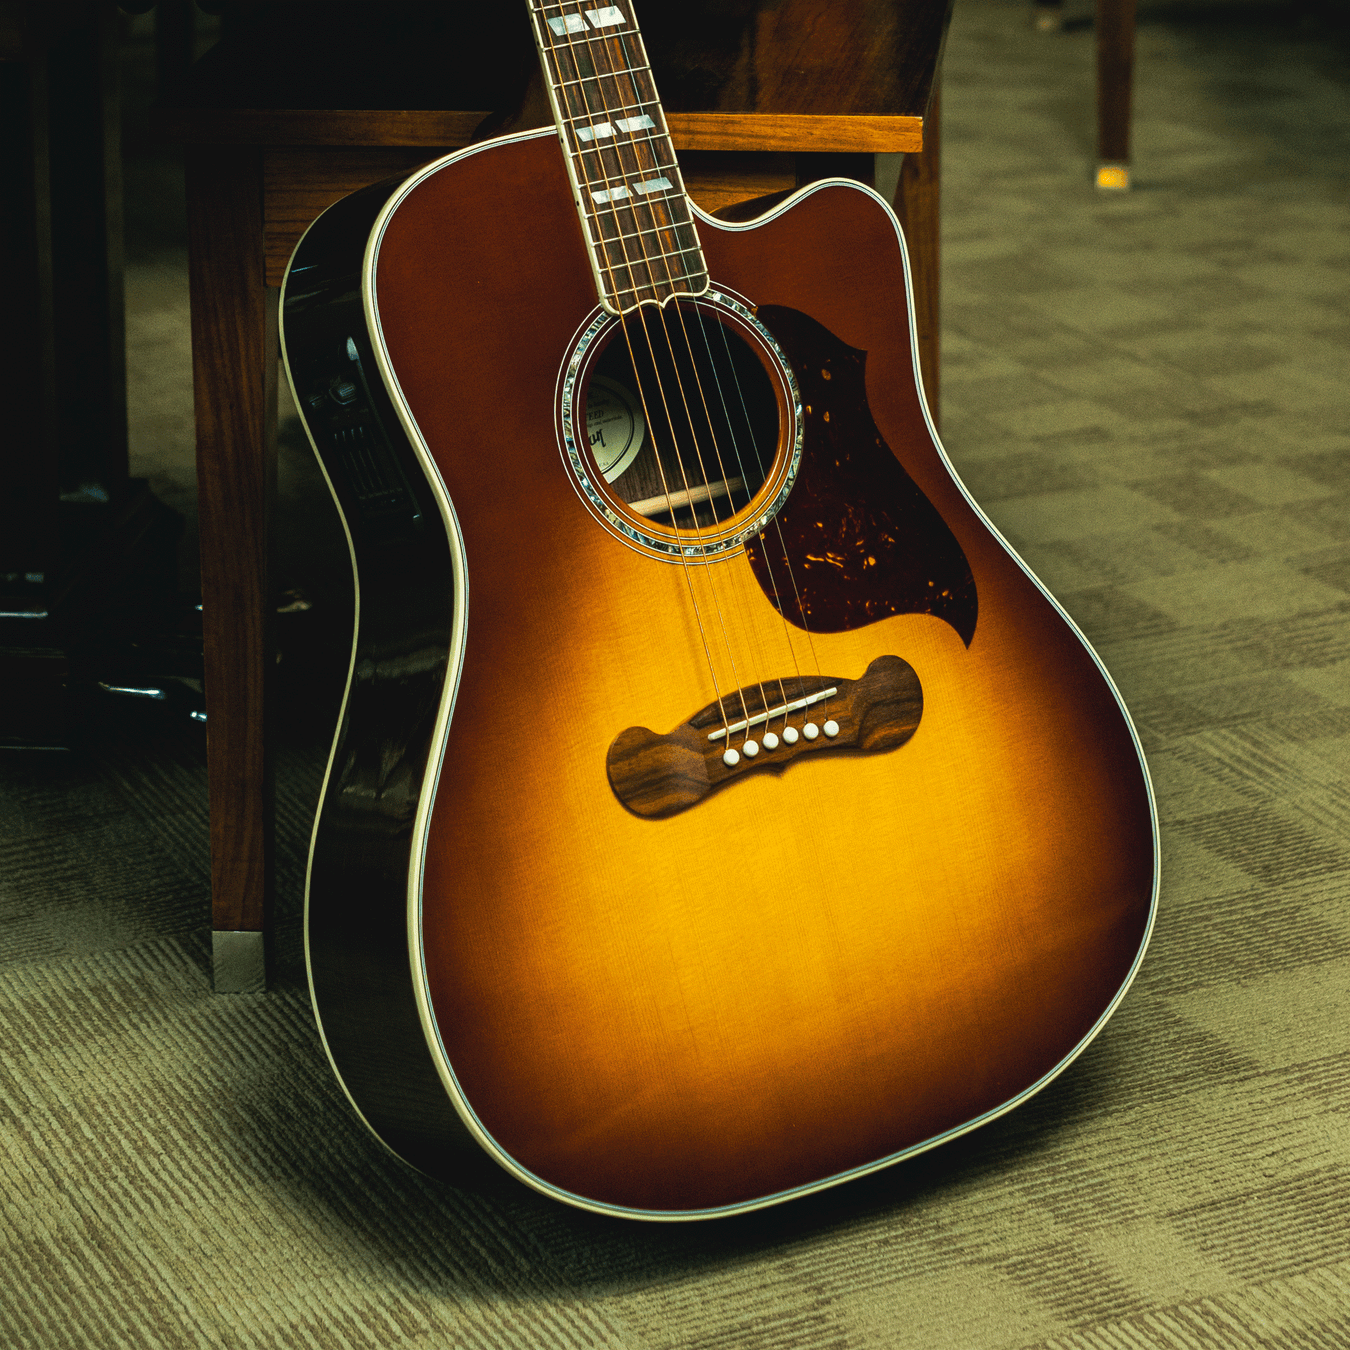 Gibson Songwriter Acoustic Guitar